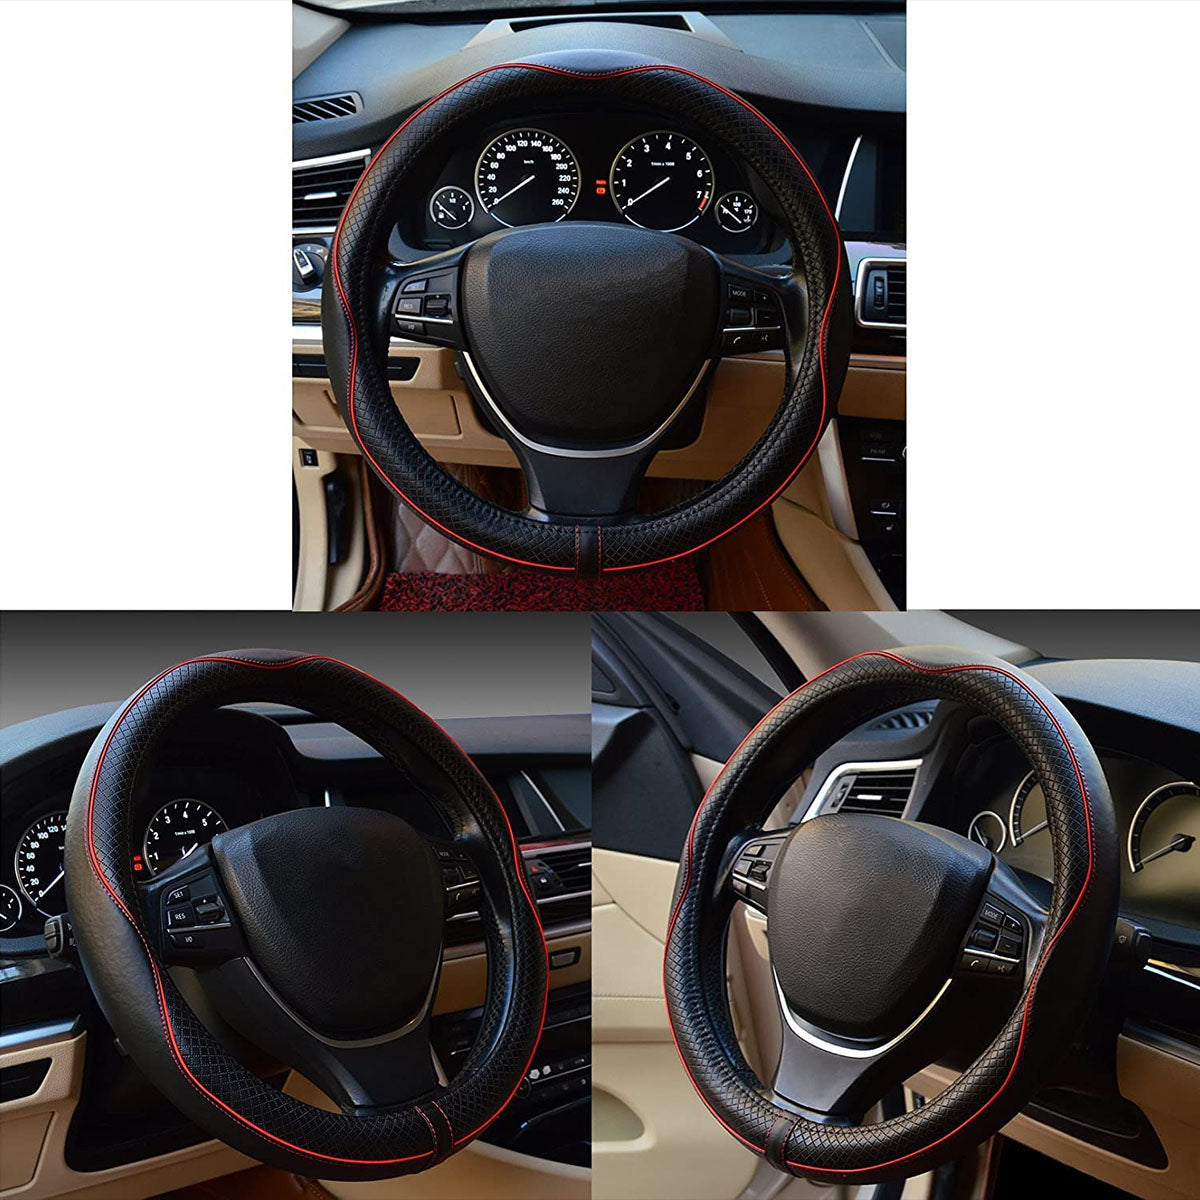 Car Steering Wheel Cover, Custom For Your Cars, Anti-Slip, Safety, Soft, Breathable, Heavy Duty, Thick, Full Surround, Sports Style, Car Accessories LR18990